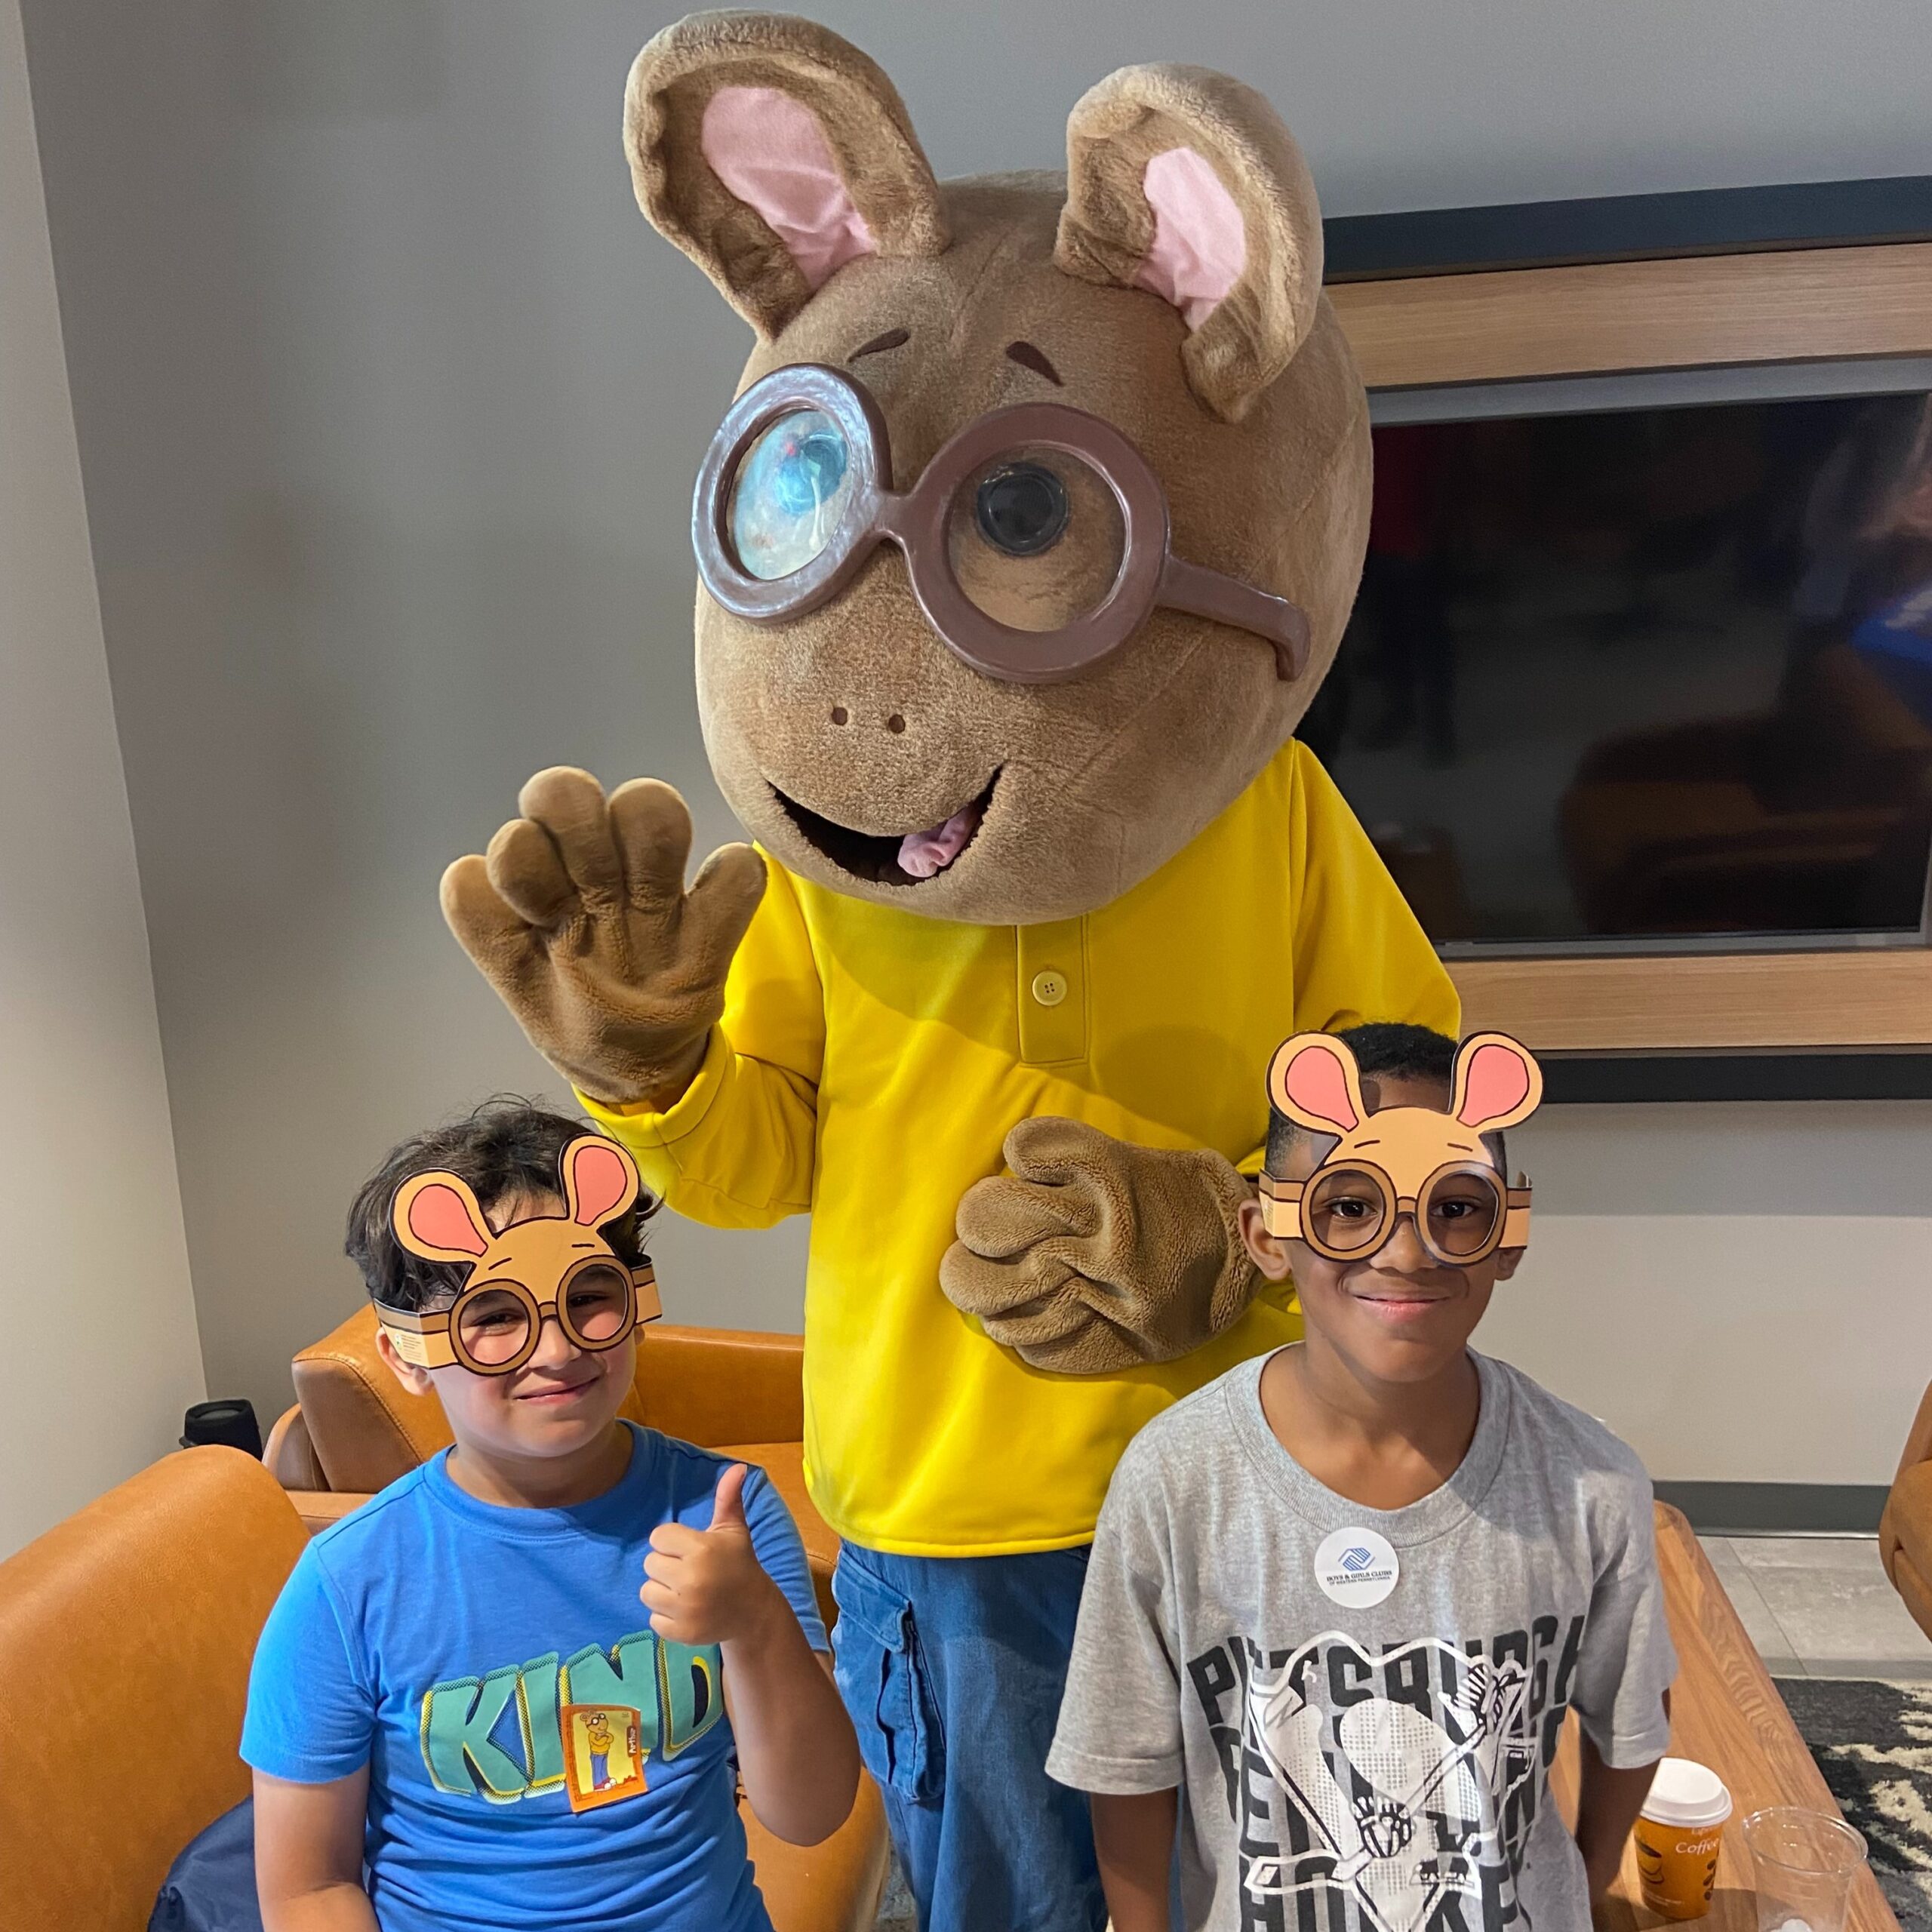 A photo of the Arthur mascot posing with two children. Arthur will be at the Great Yinzer Tailgate on November 4th, 2023.